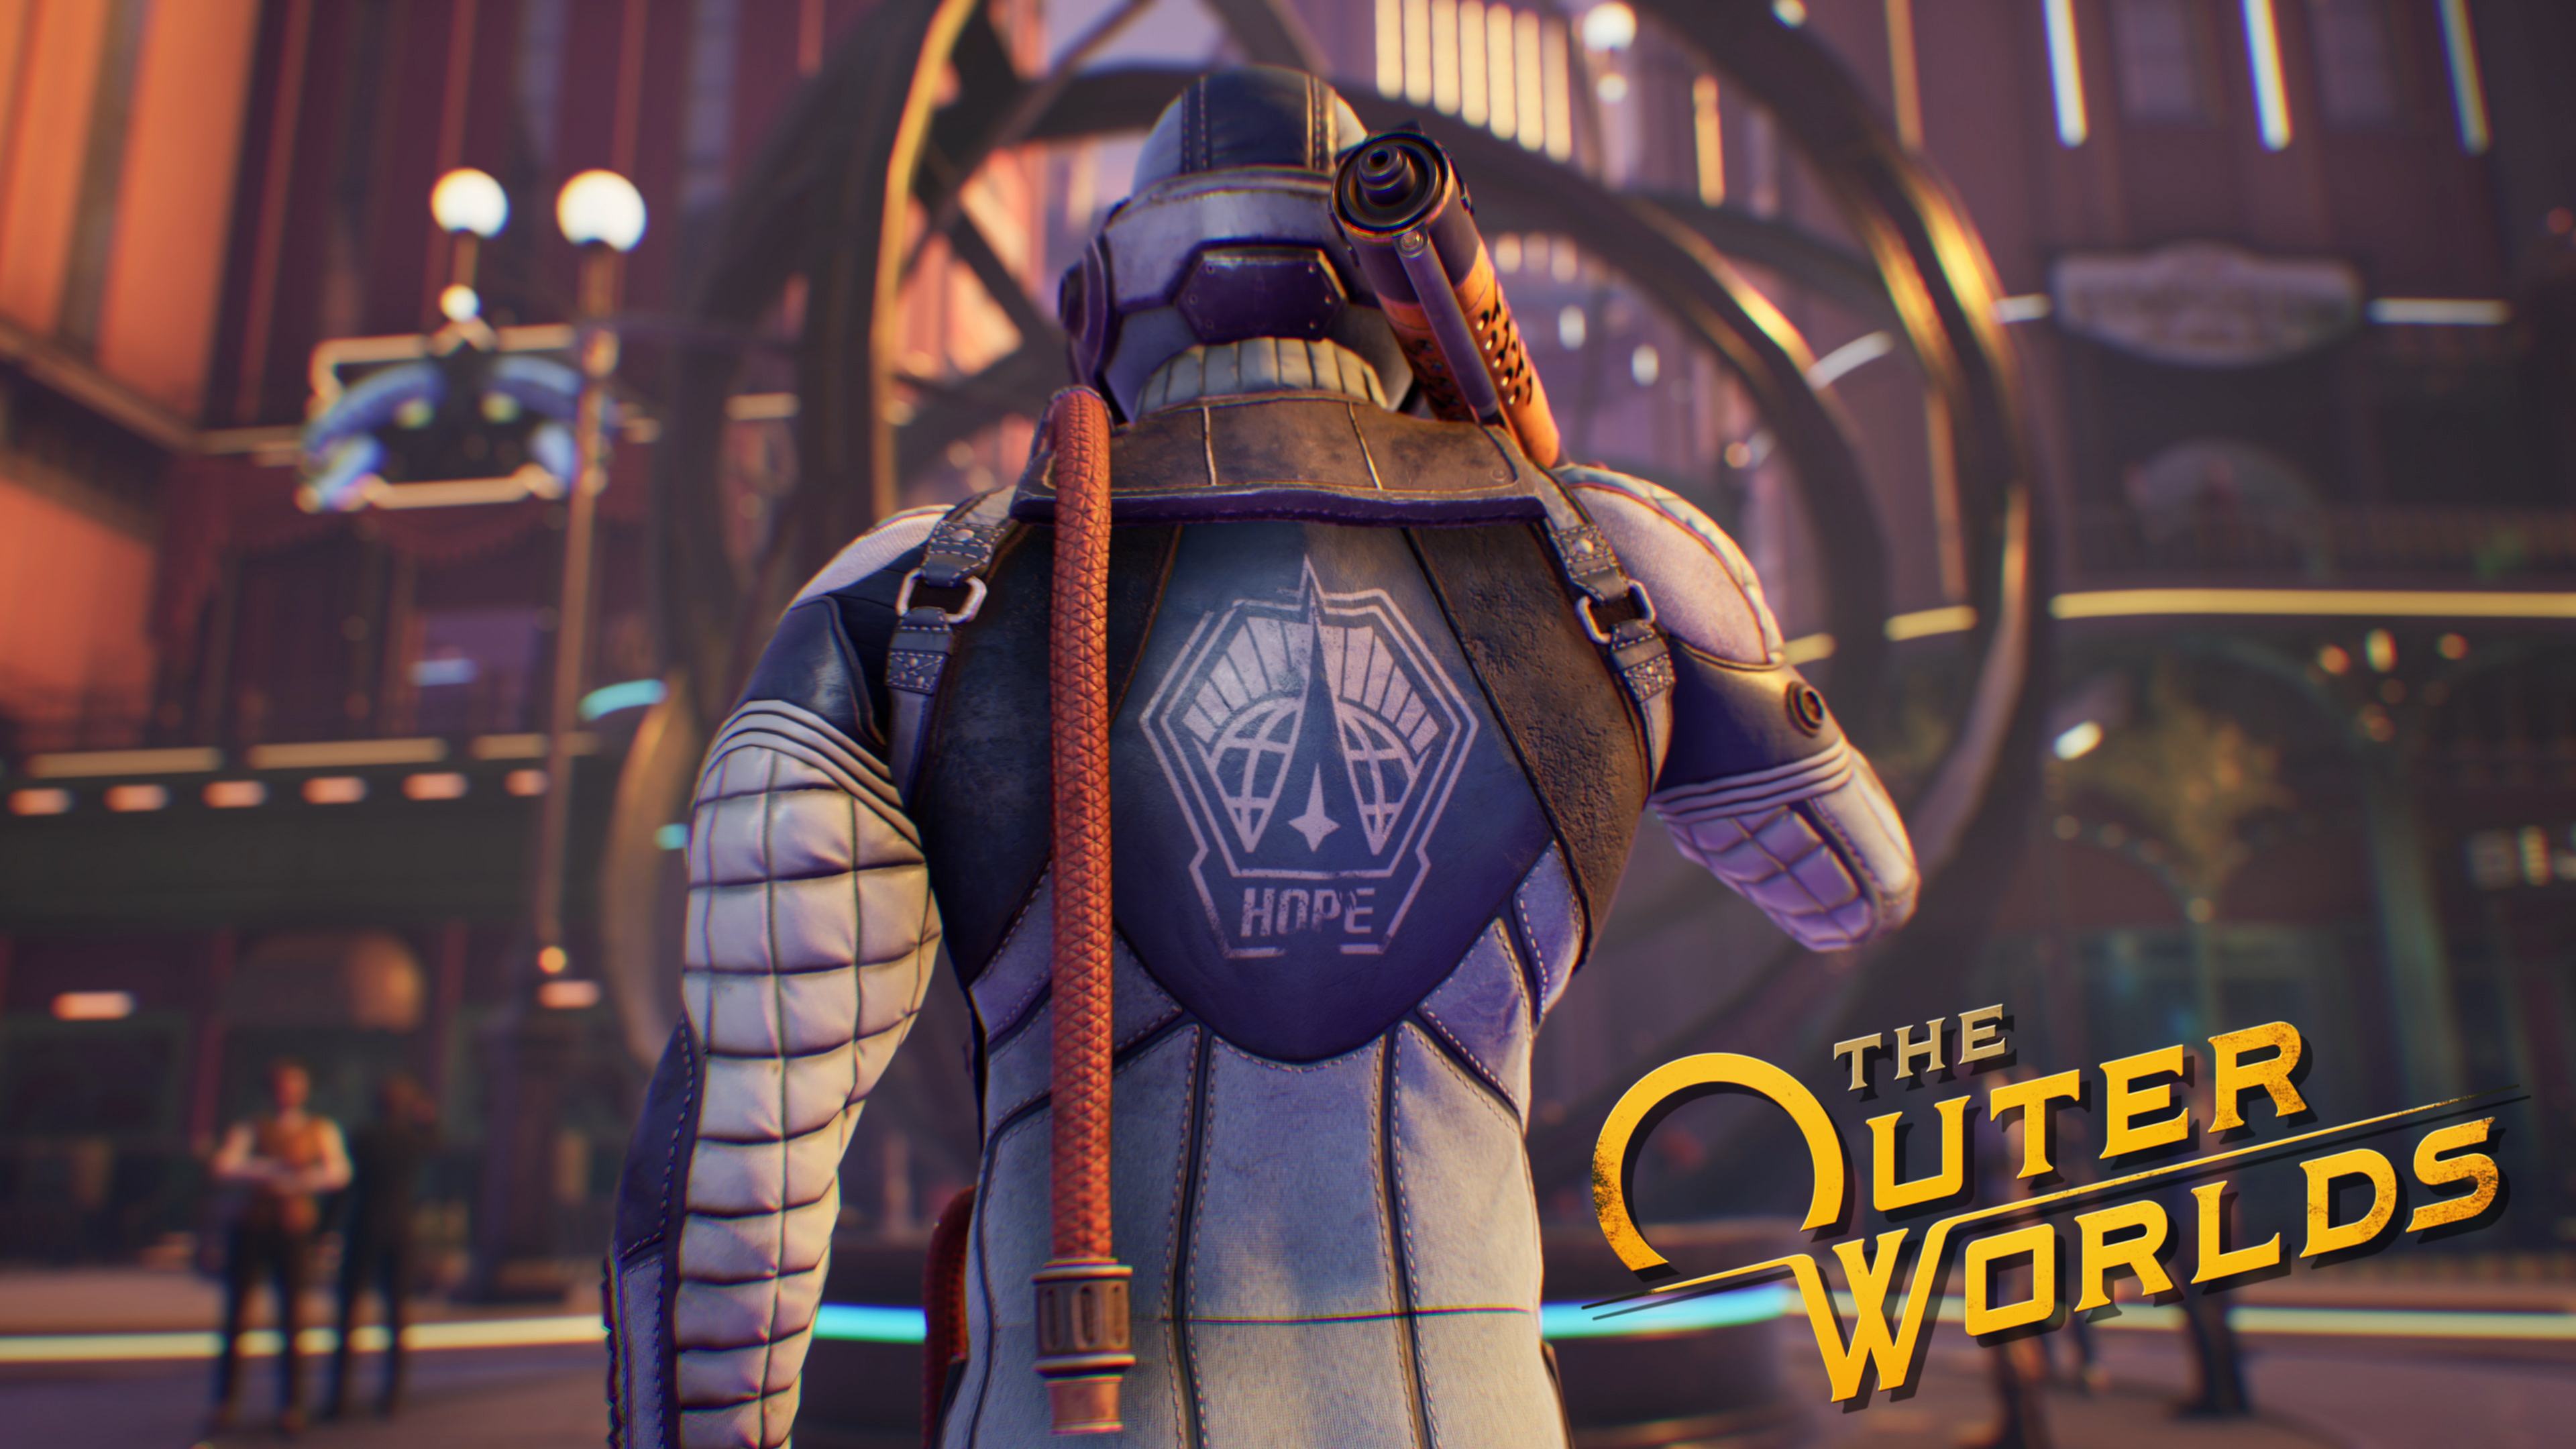 Video Game The Outer Worlds 3840x2160